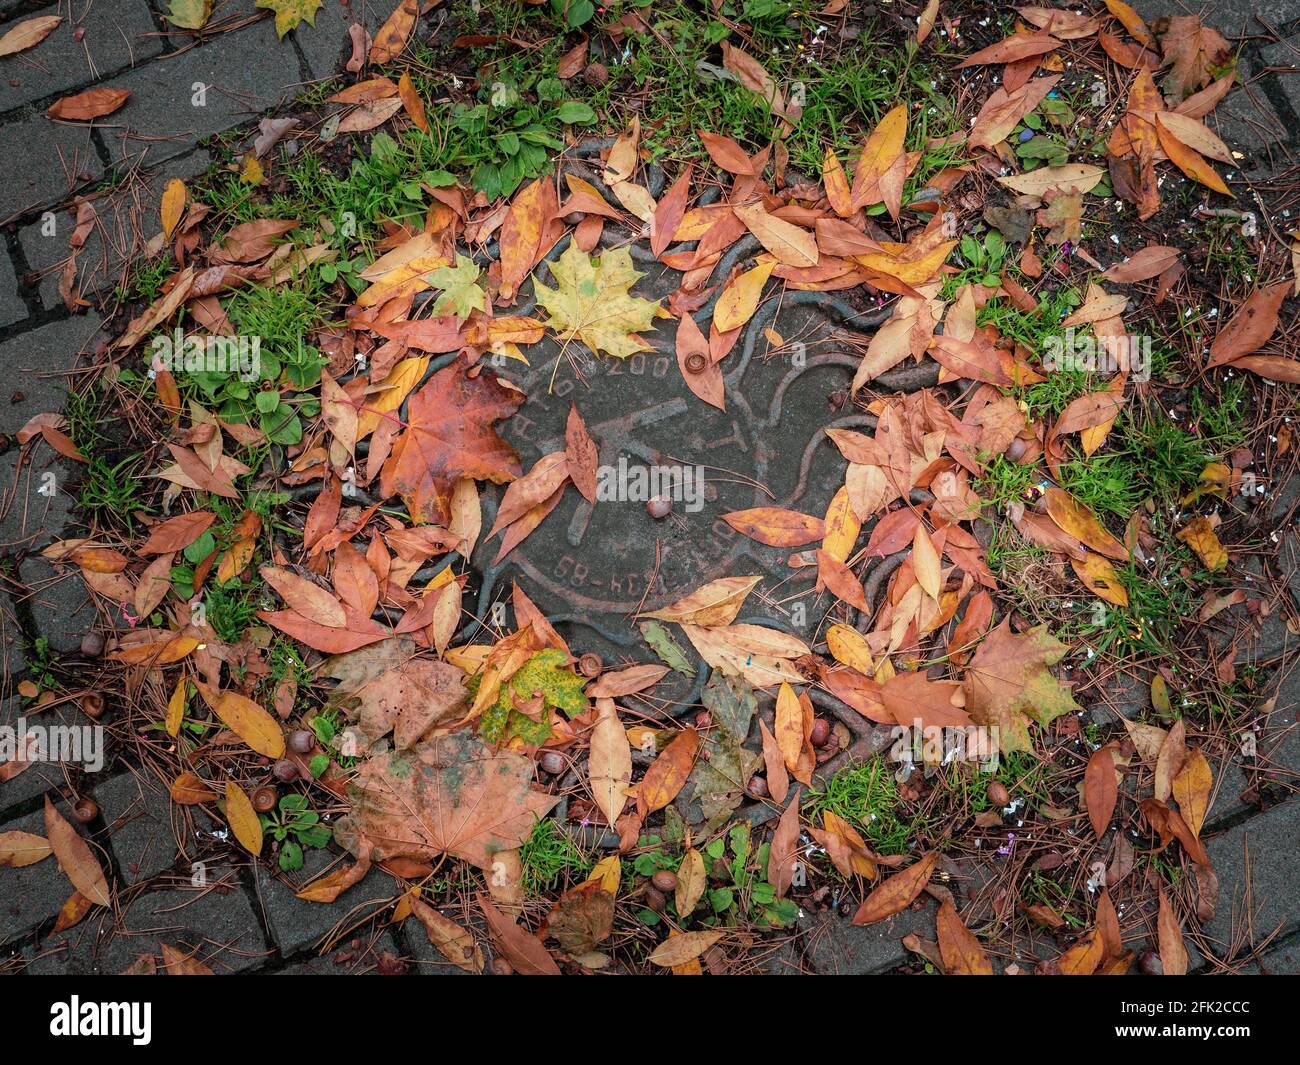 Top view of a manhole cover circled by colorful yellow, orange, red and green autumn fallen leaves. Natural fall background. Stock Photo